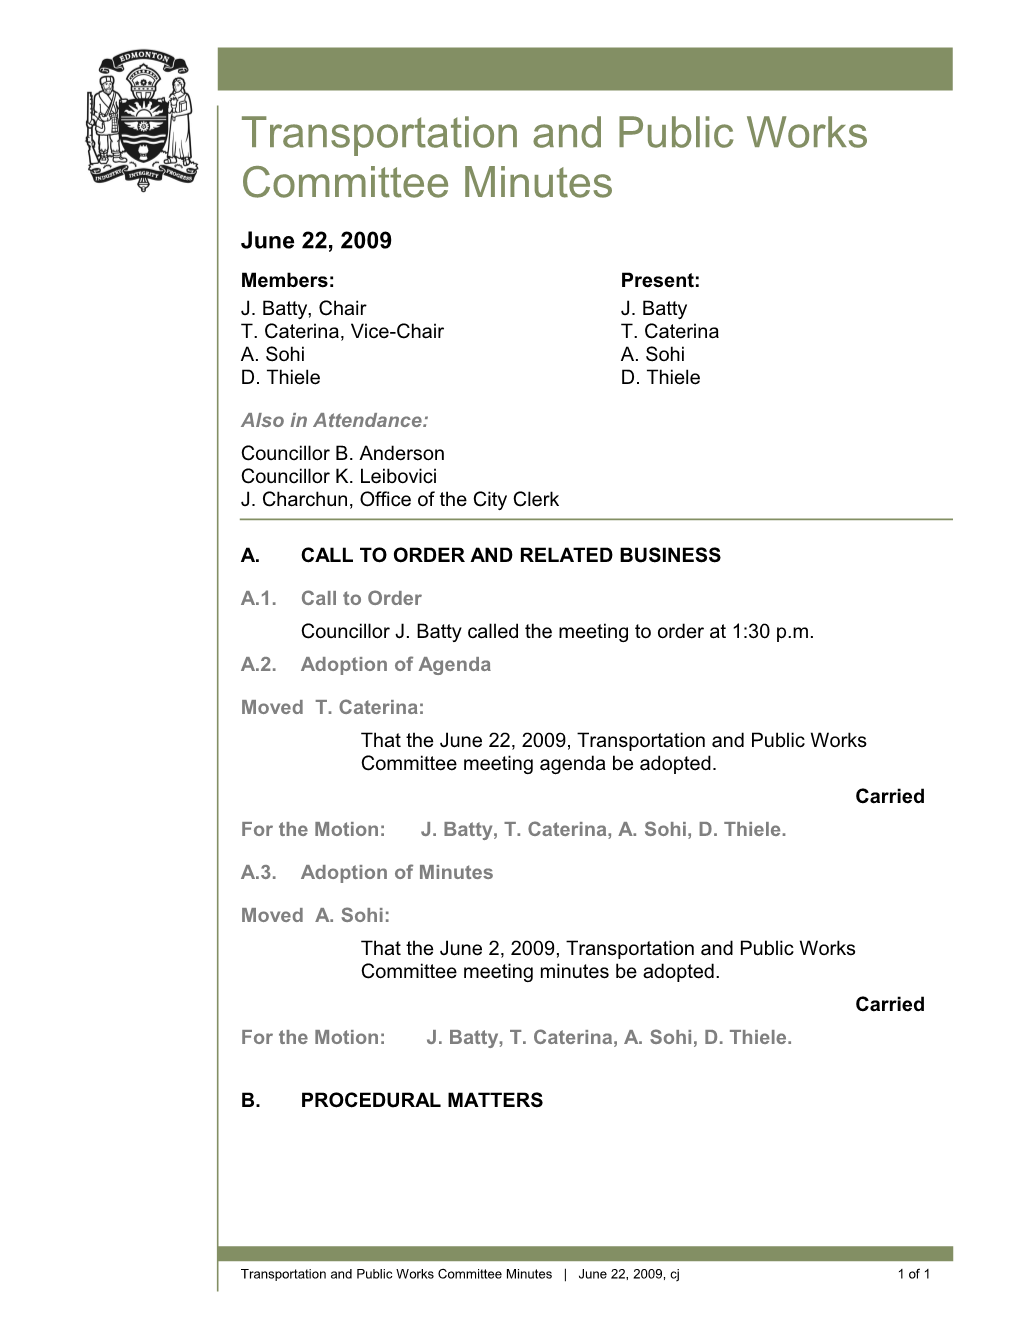 Minutes for Transportation and Public Works Committee June 22, 2009 Meeting